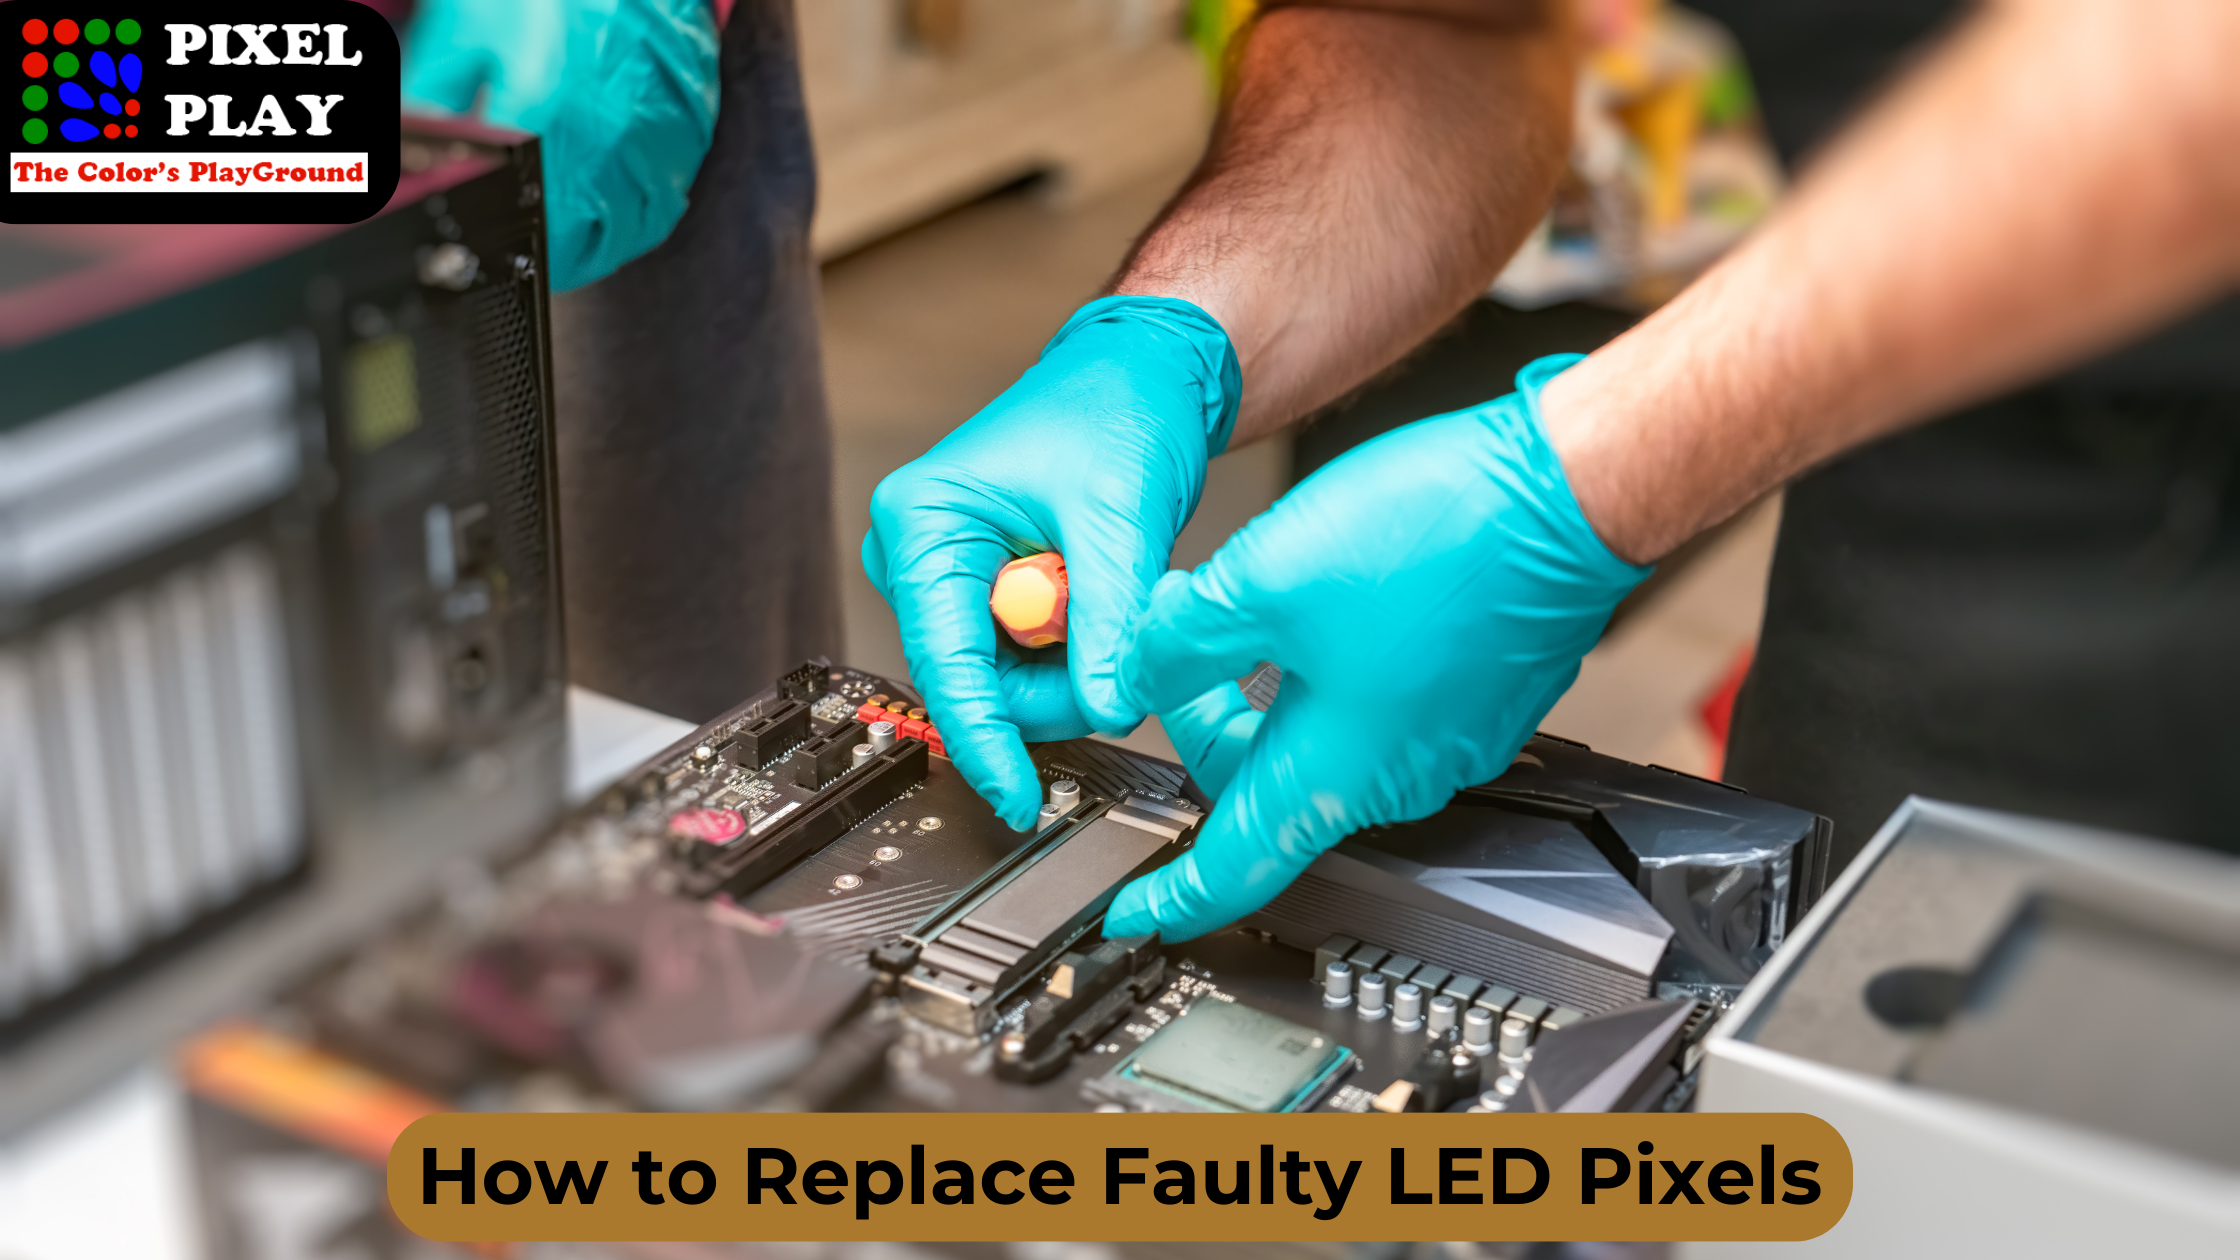 How to Replace Faulty LED Pixels: Step-by-Step Repair Techniques